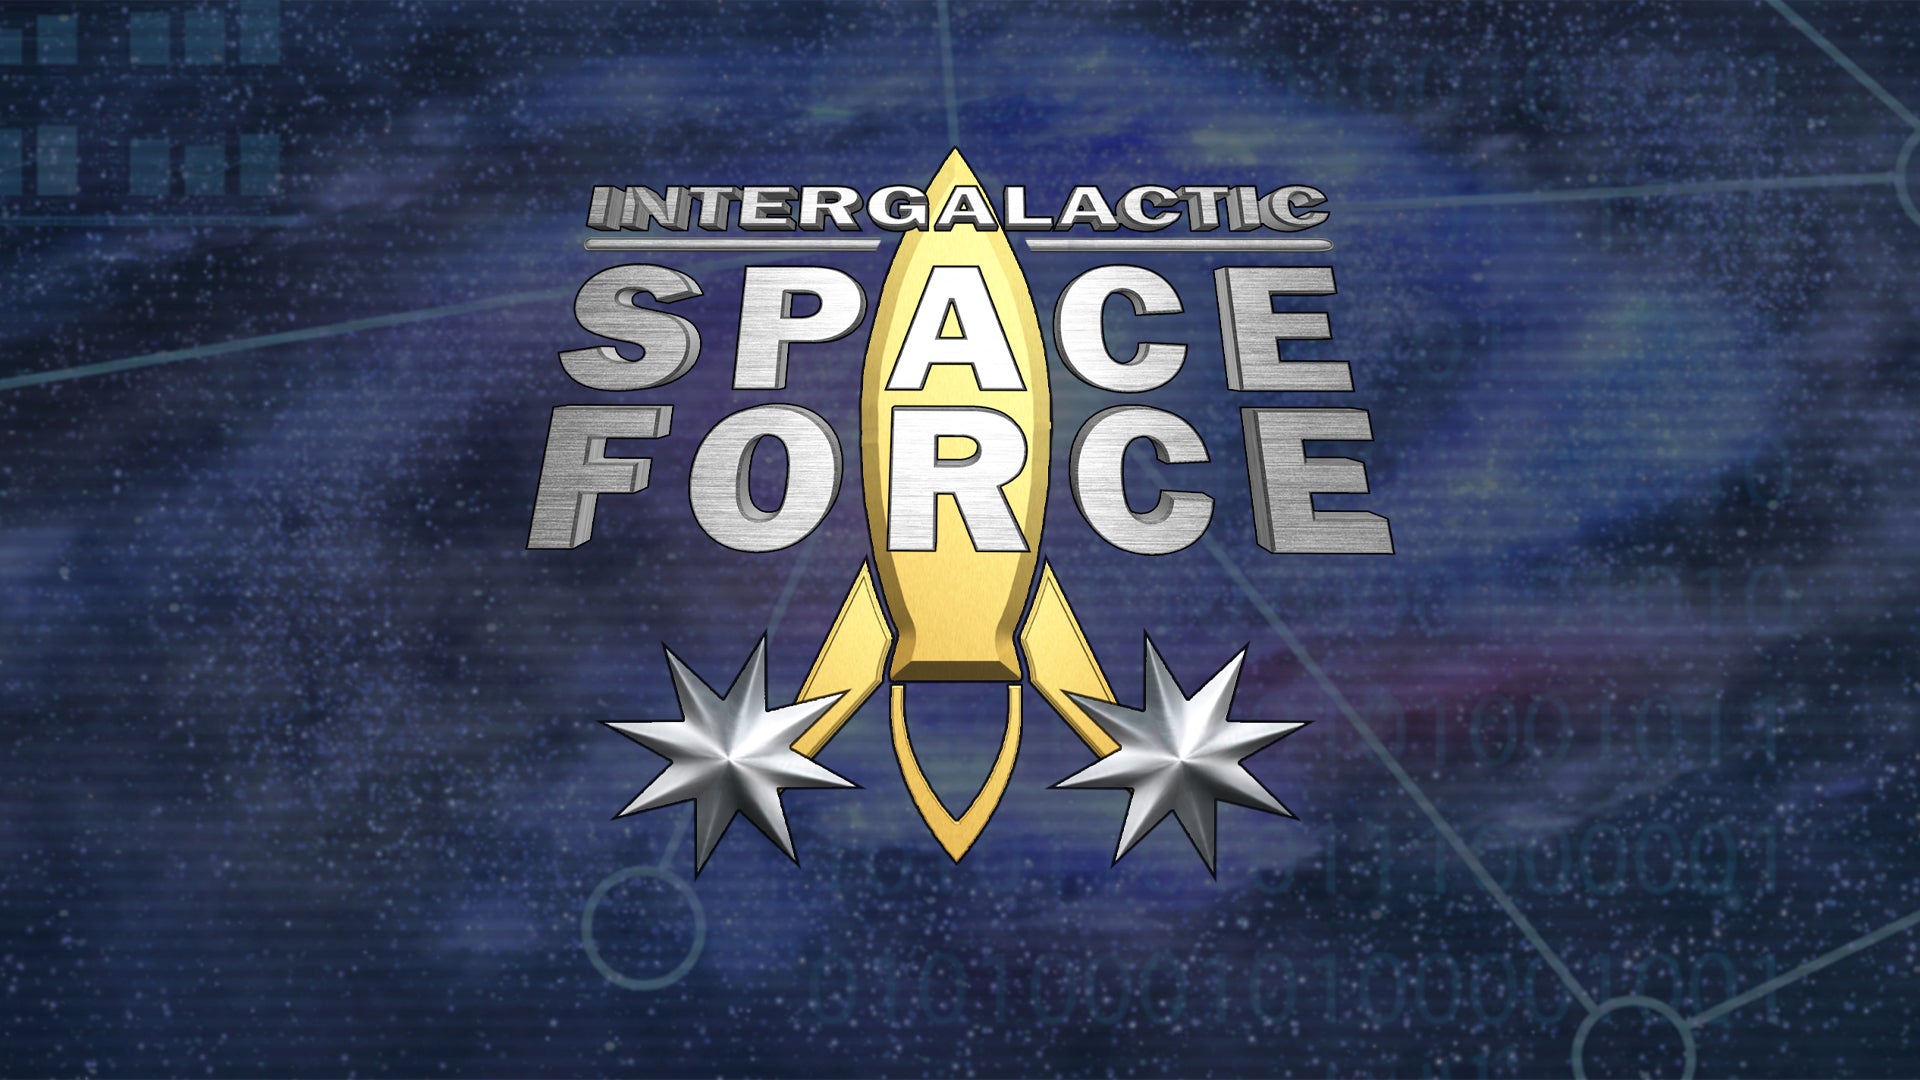 Load video: Intergalactic Space Force - Is it right for you?